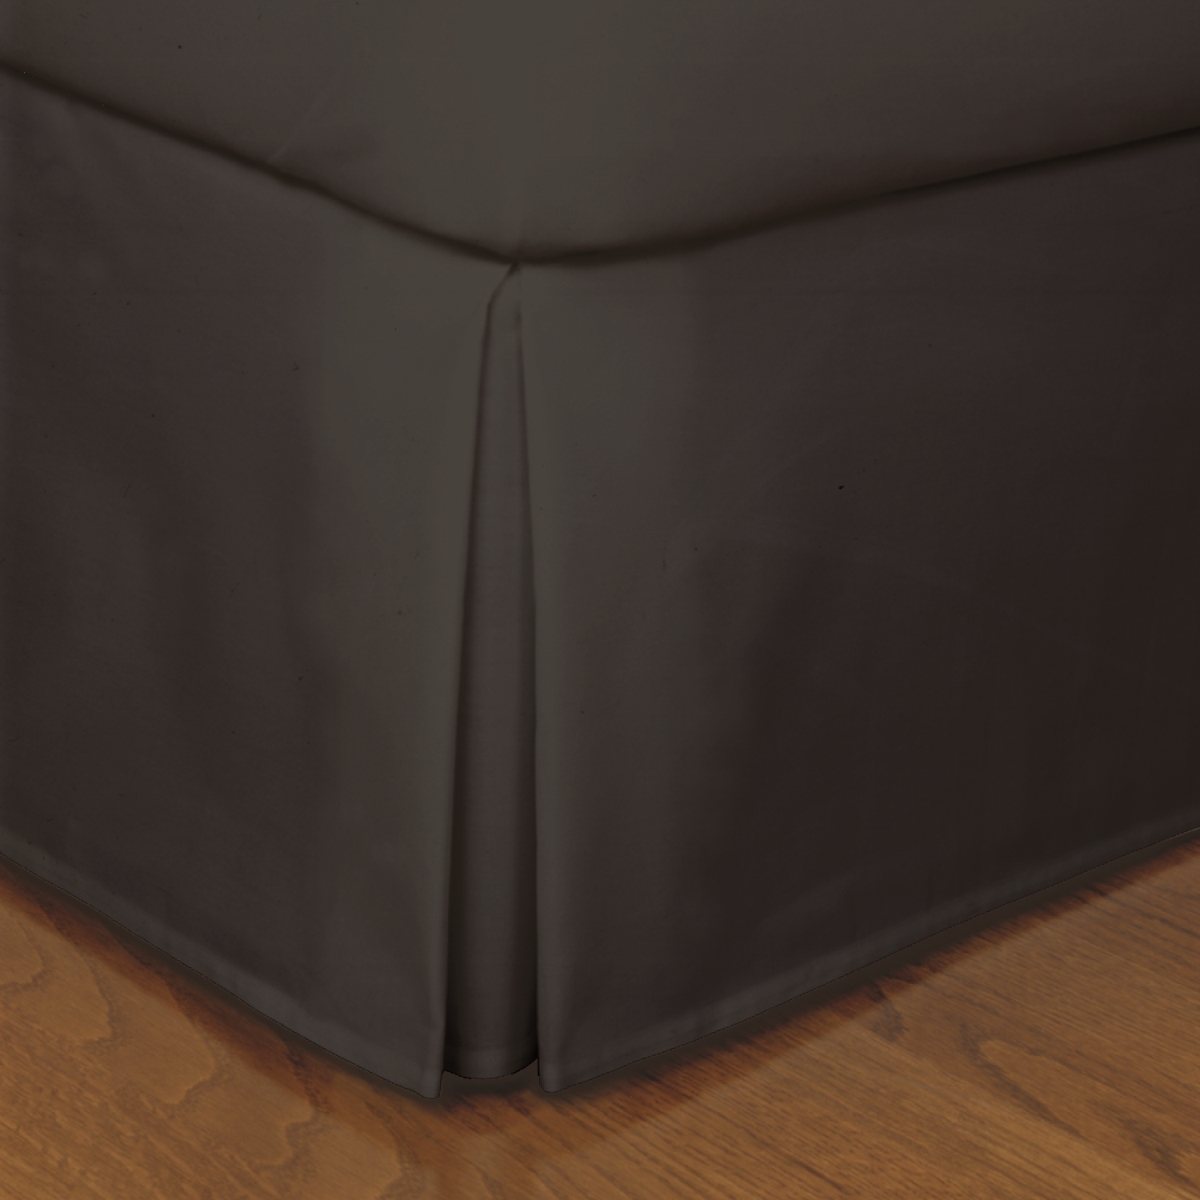 Fre23614blac01 14 In. Microfiber Bed Skirts Black - Twin